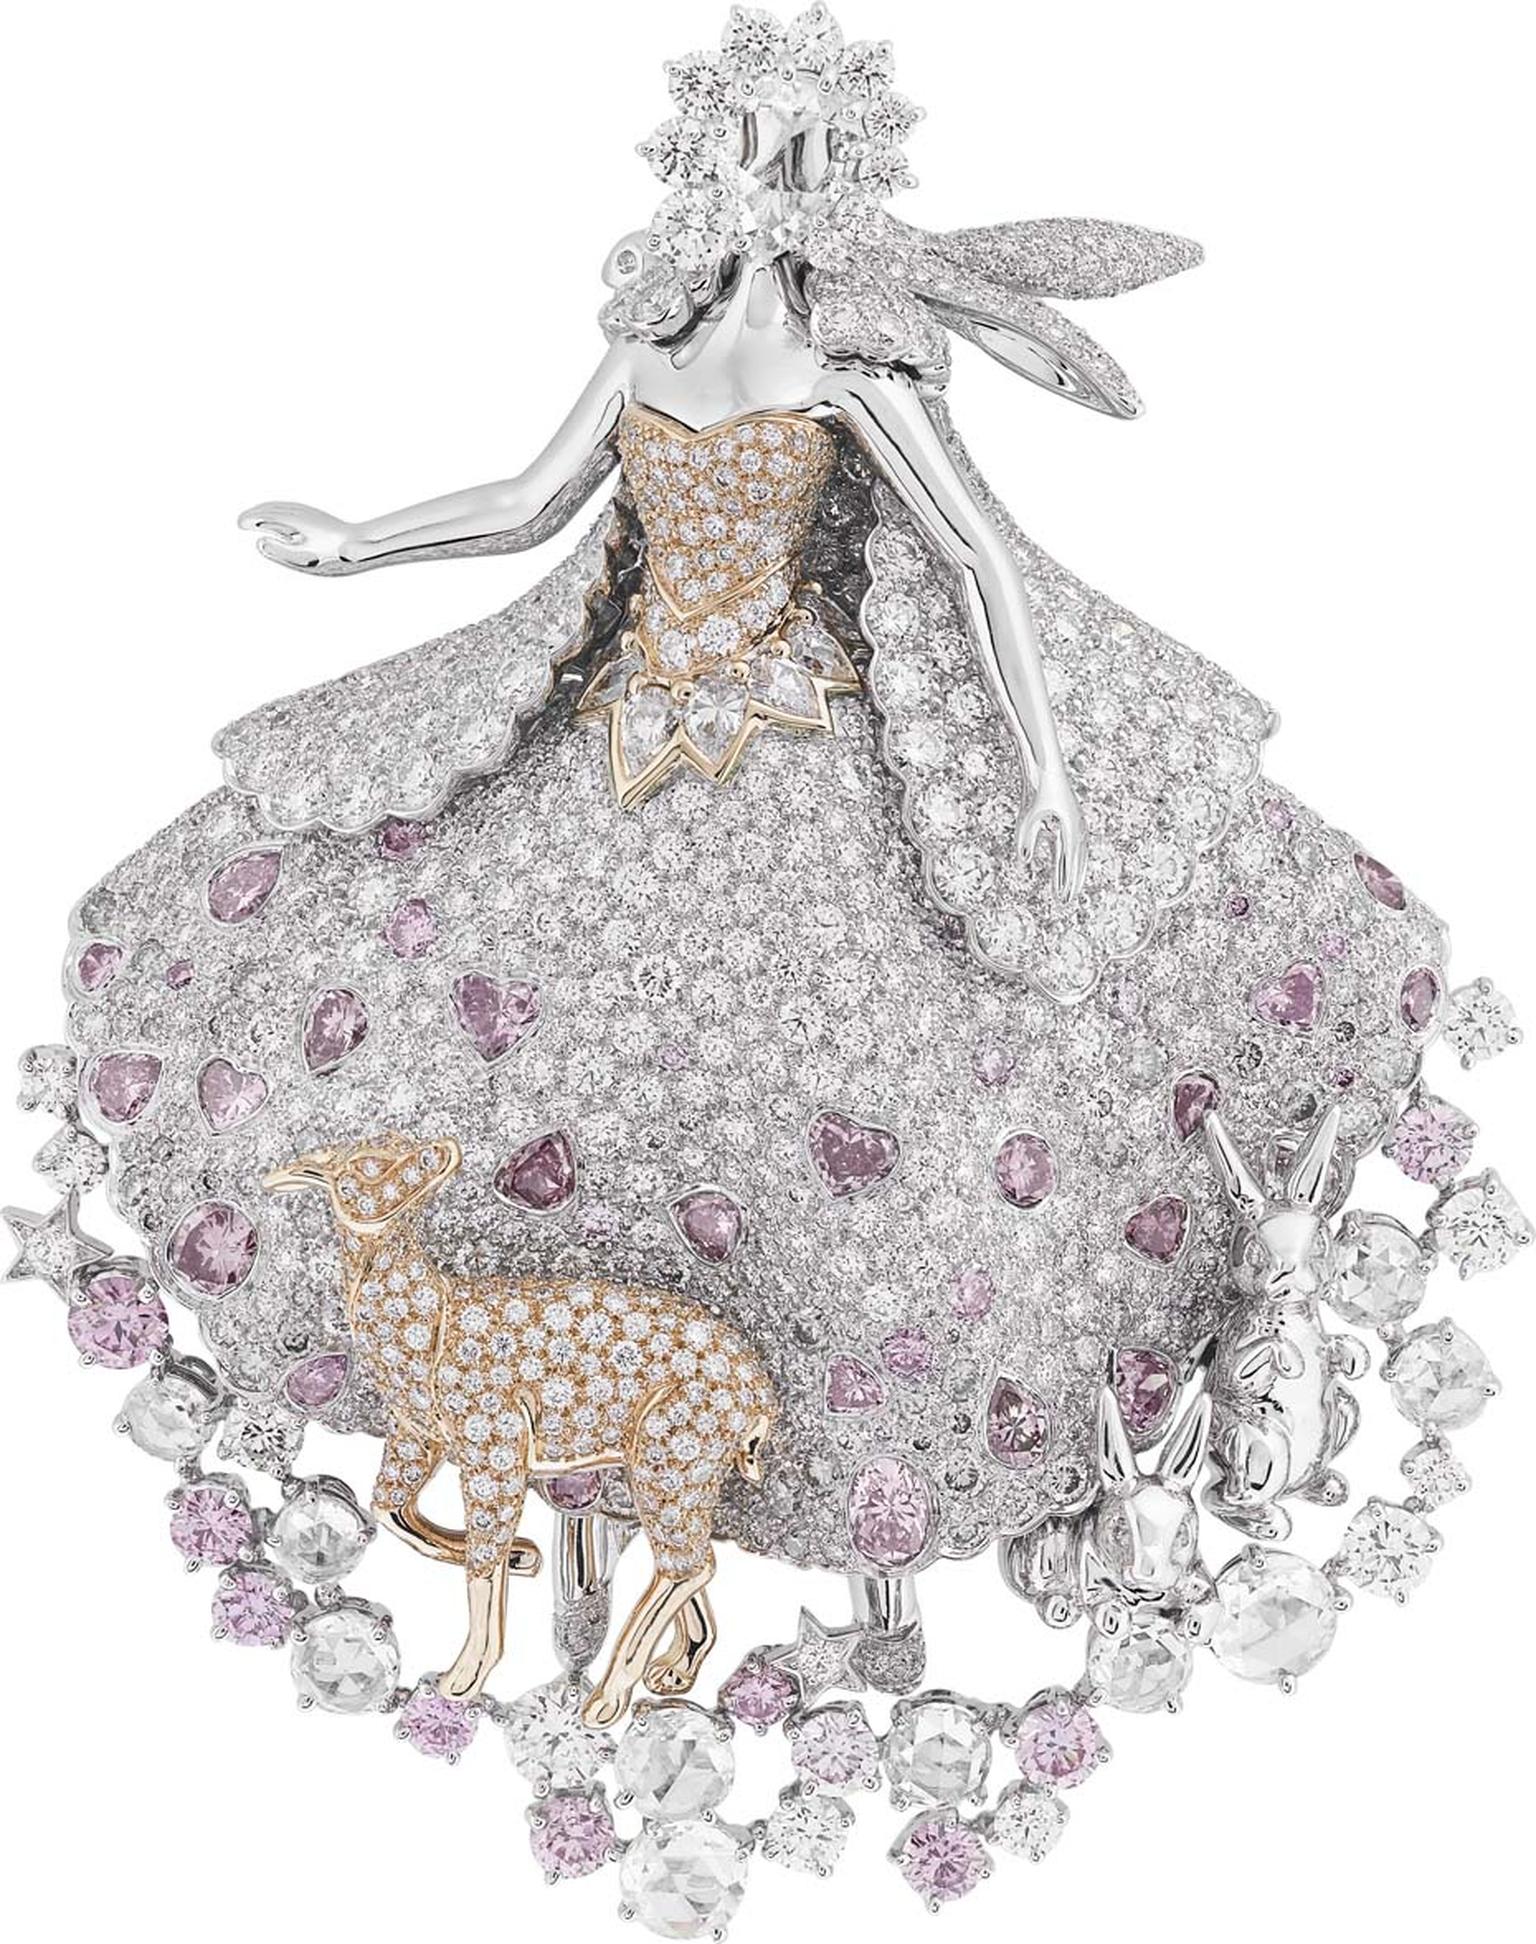 Van Cleef & Arpels Peau d'Ane Enchanted Forest collection Donkey Skin clip in white gold with round, square and pear-cut white, pink and grey diamonds.